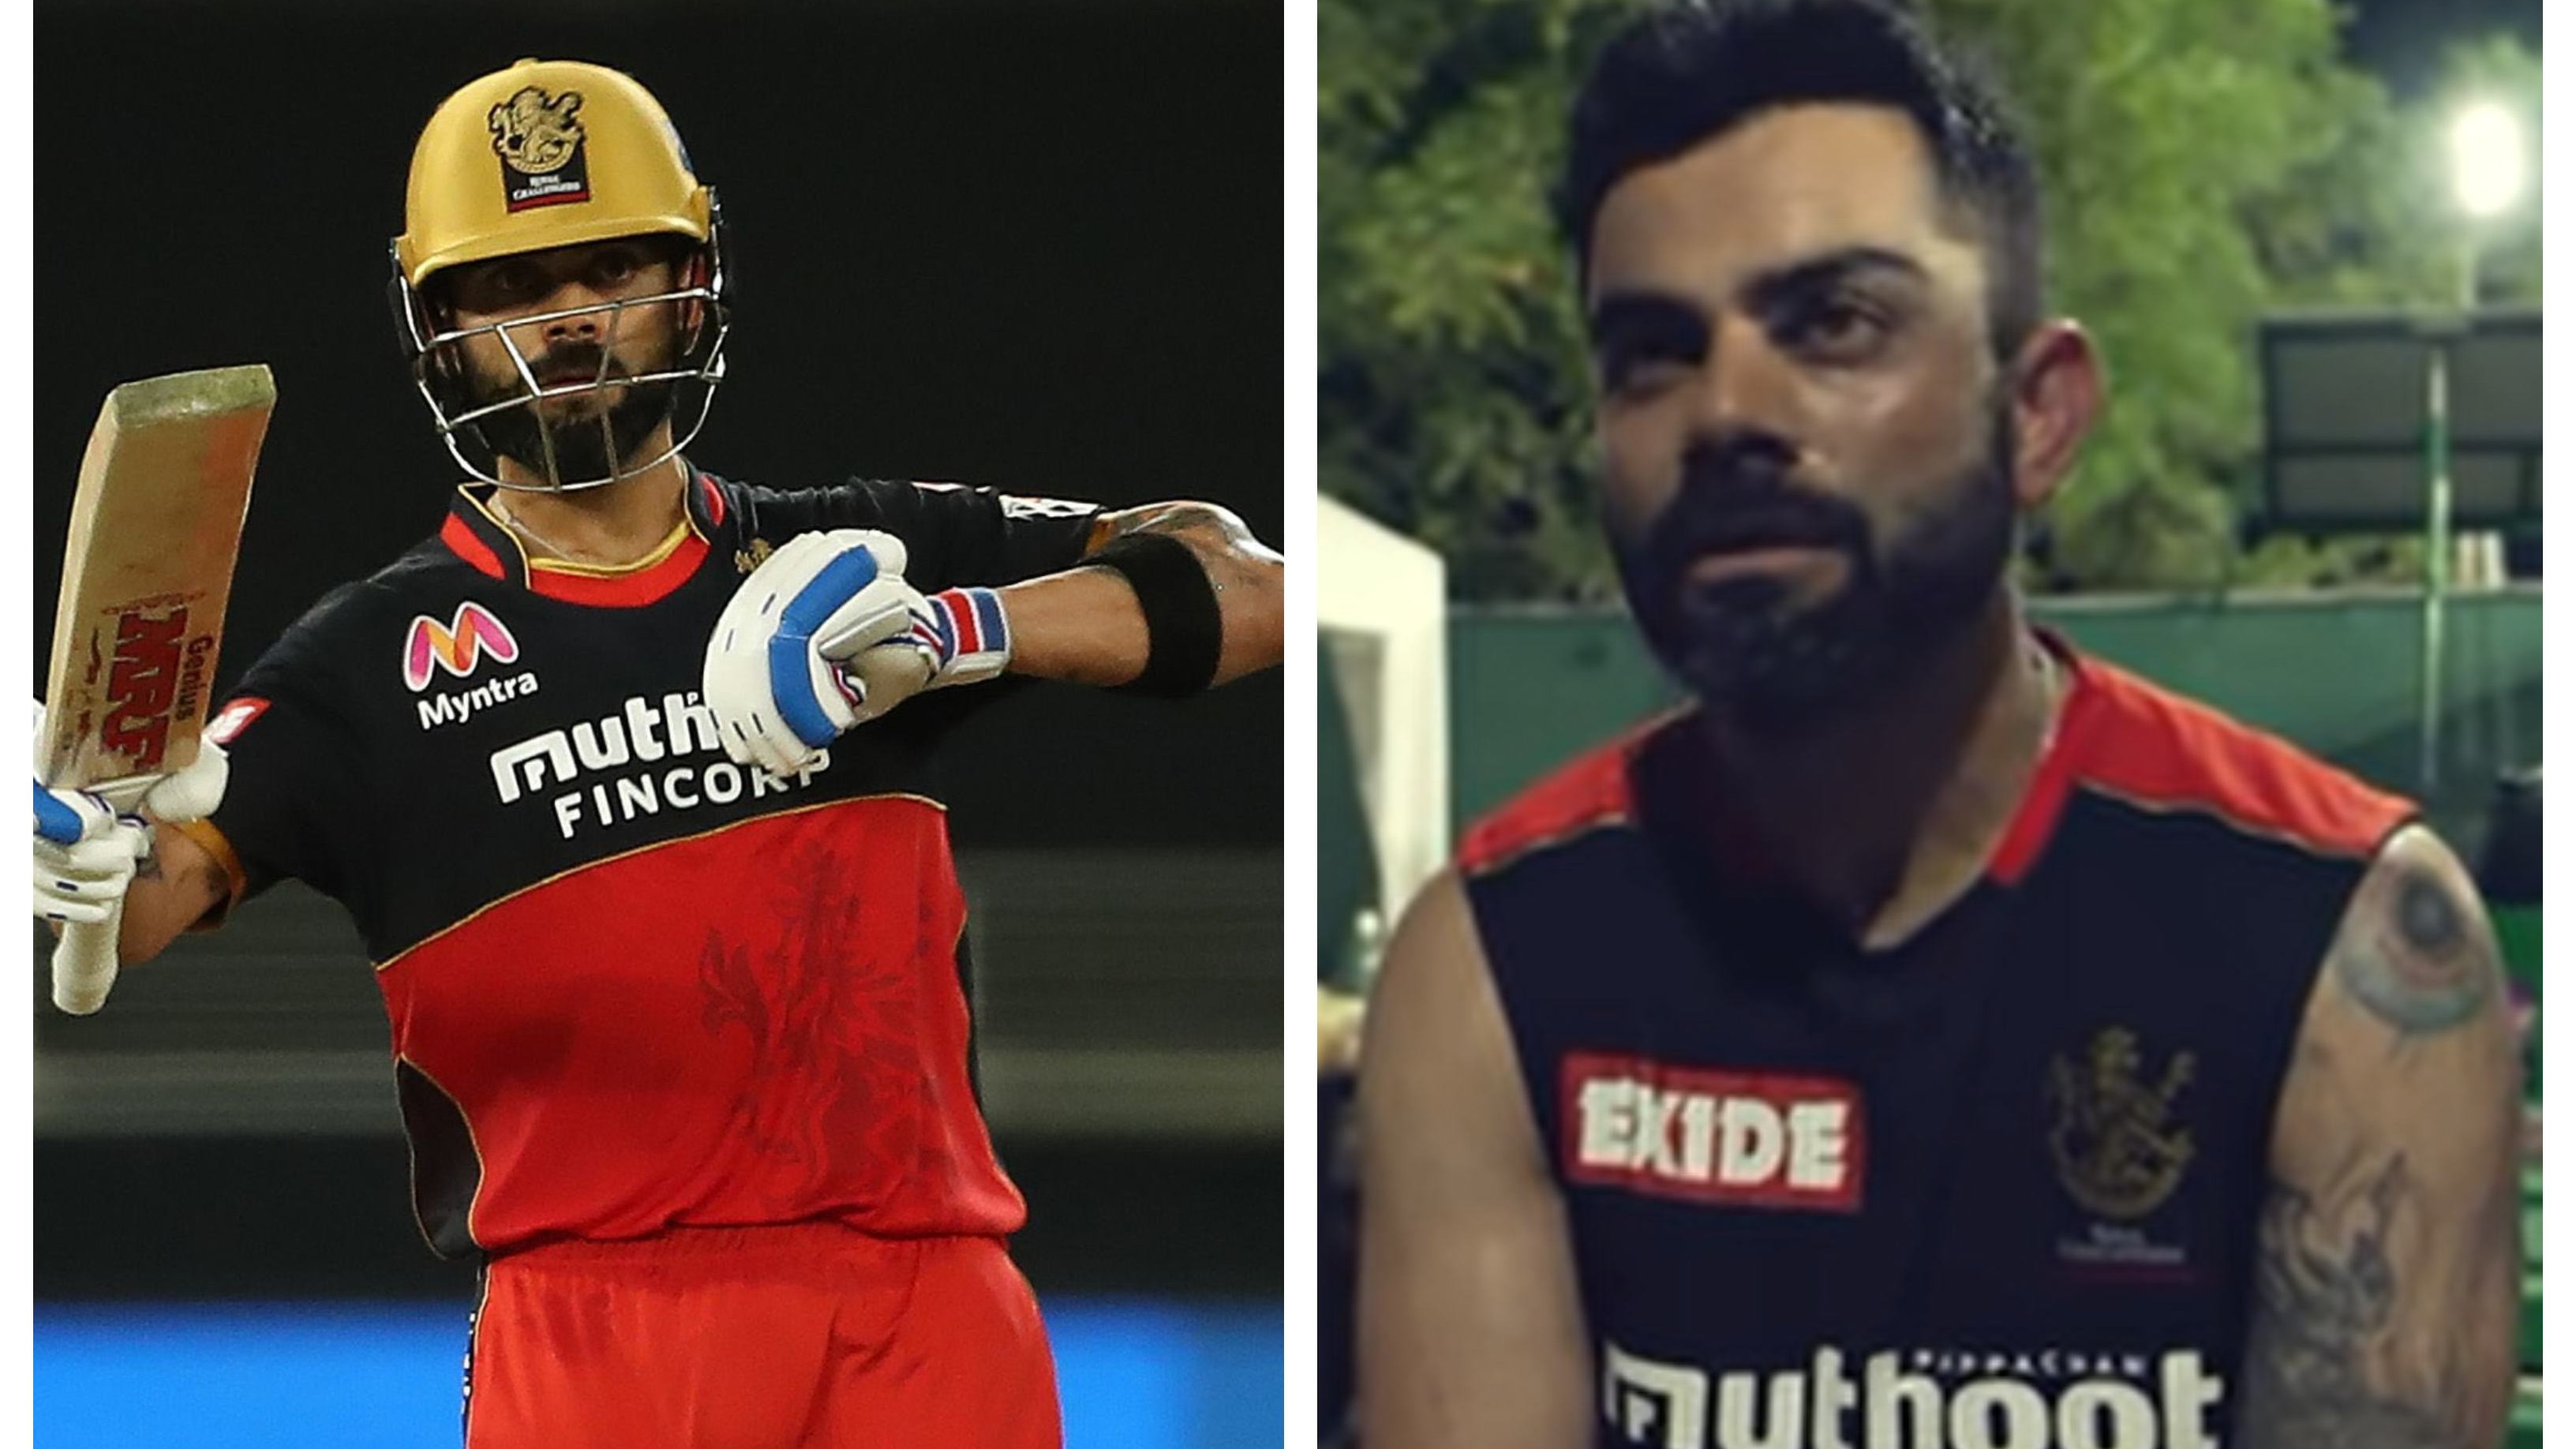 IPL 2021: WATCH – ‘I look to keep improving my game because IPL is only getting better’, says Virat Kohli